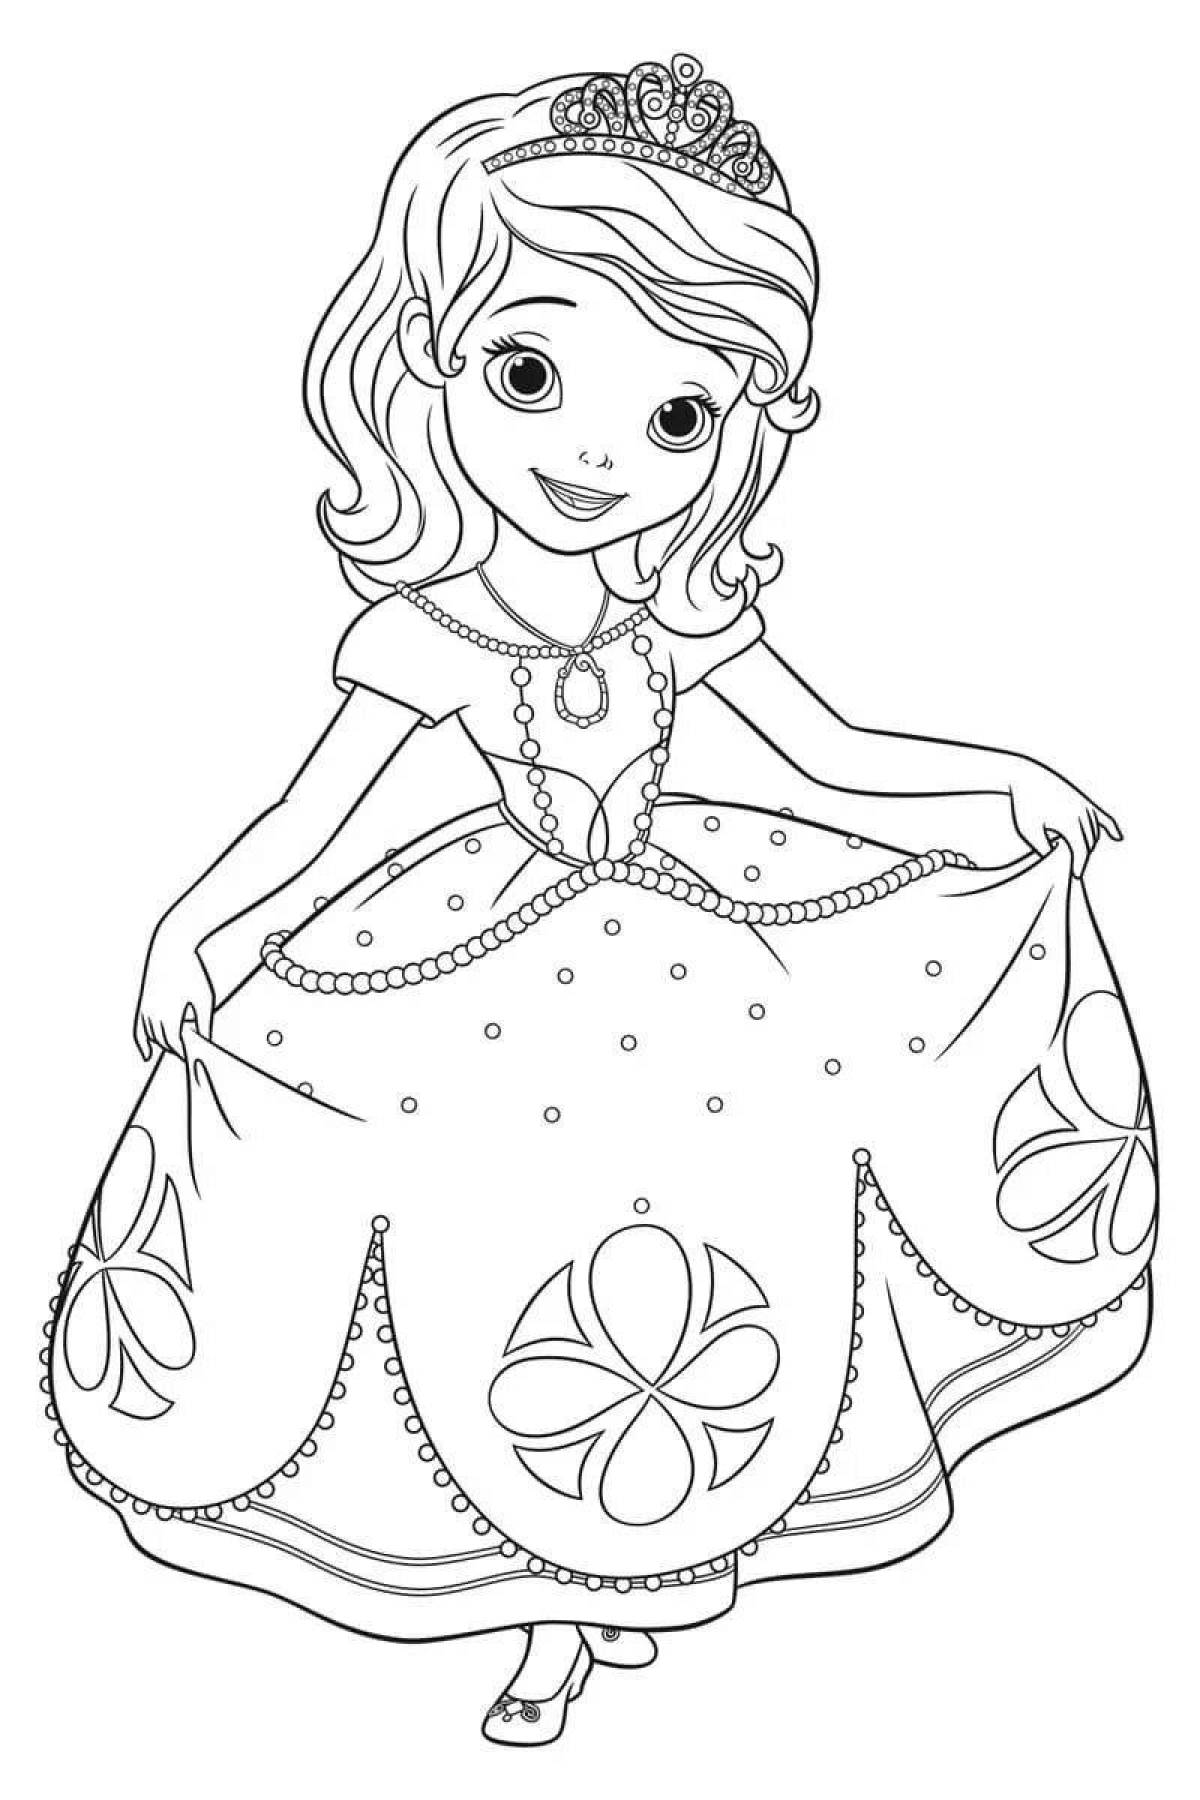 Adorable coloring book for 5 year old girls, princess